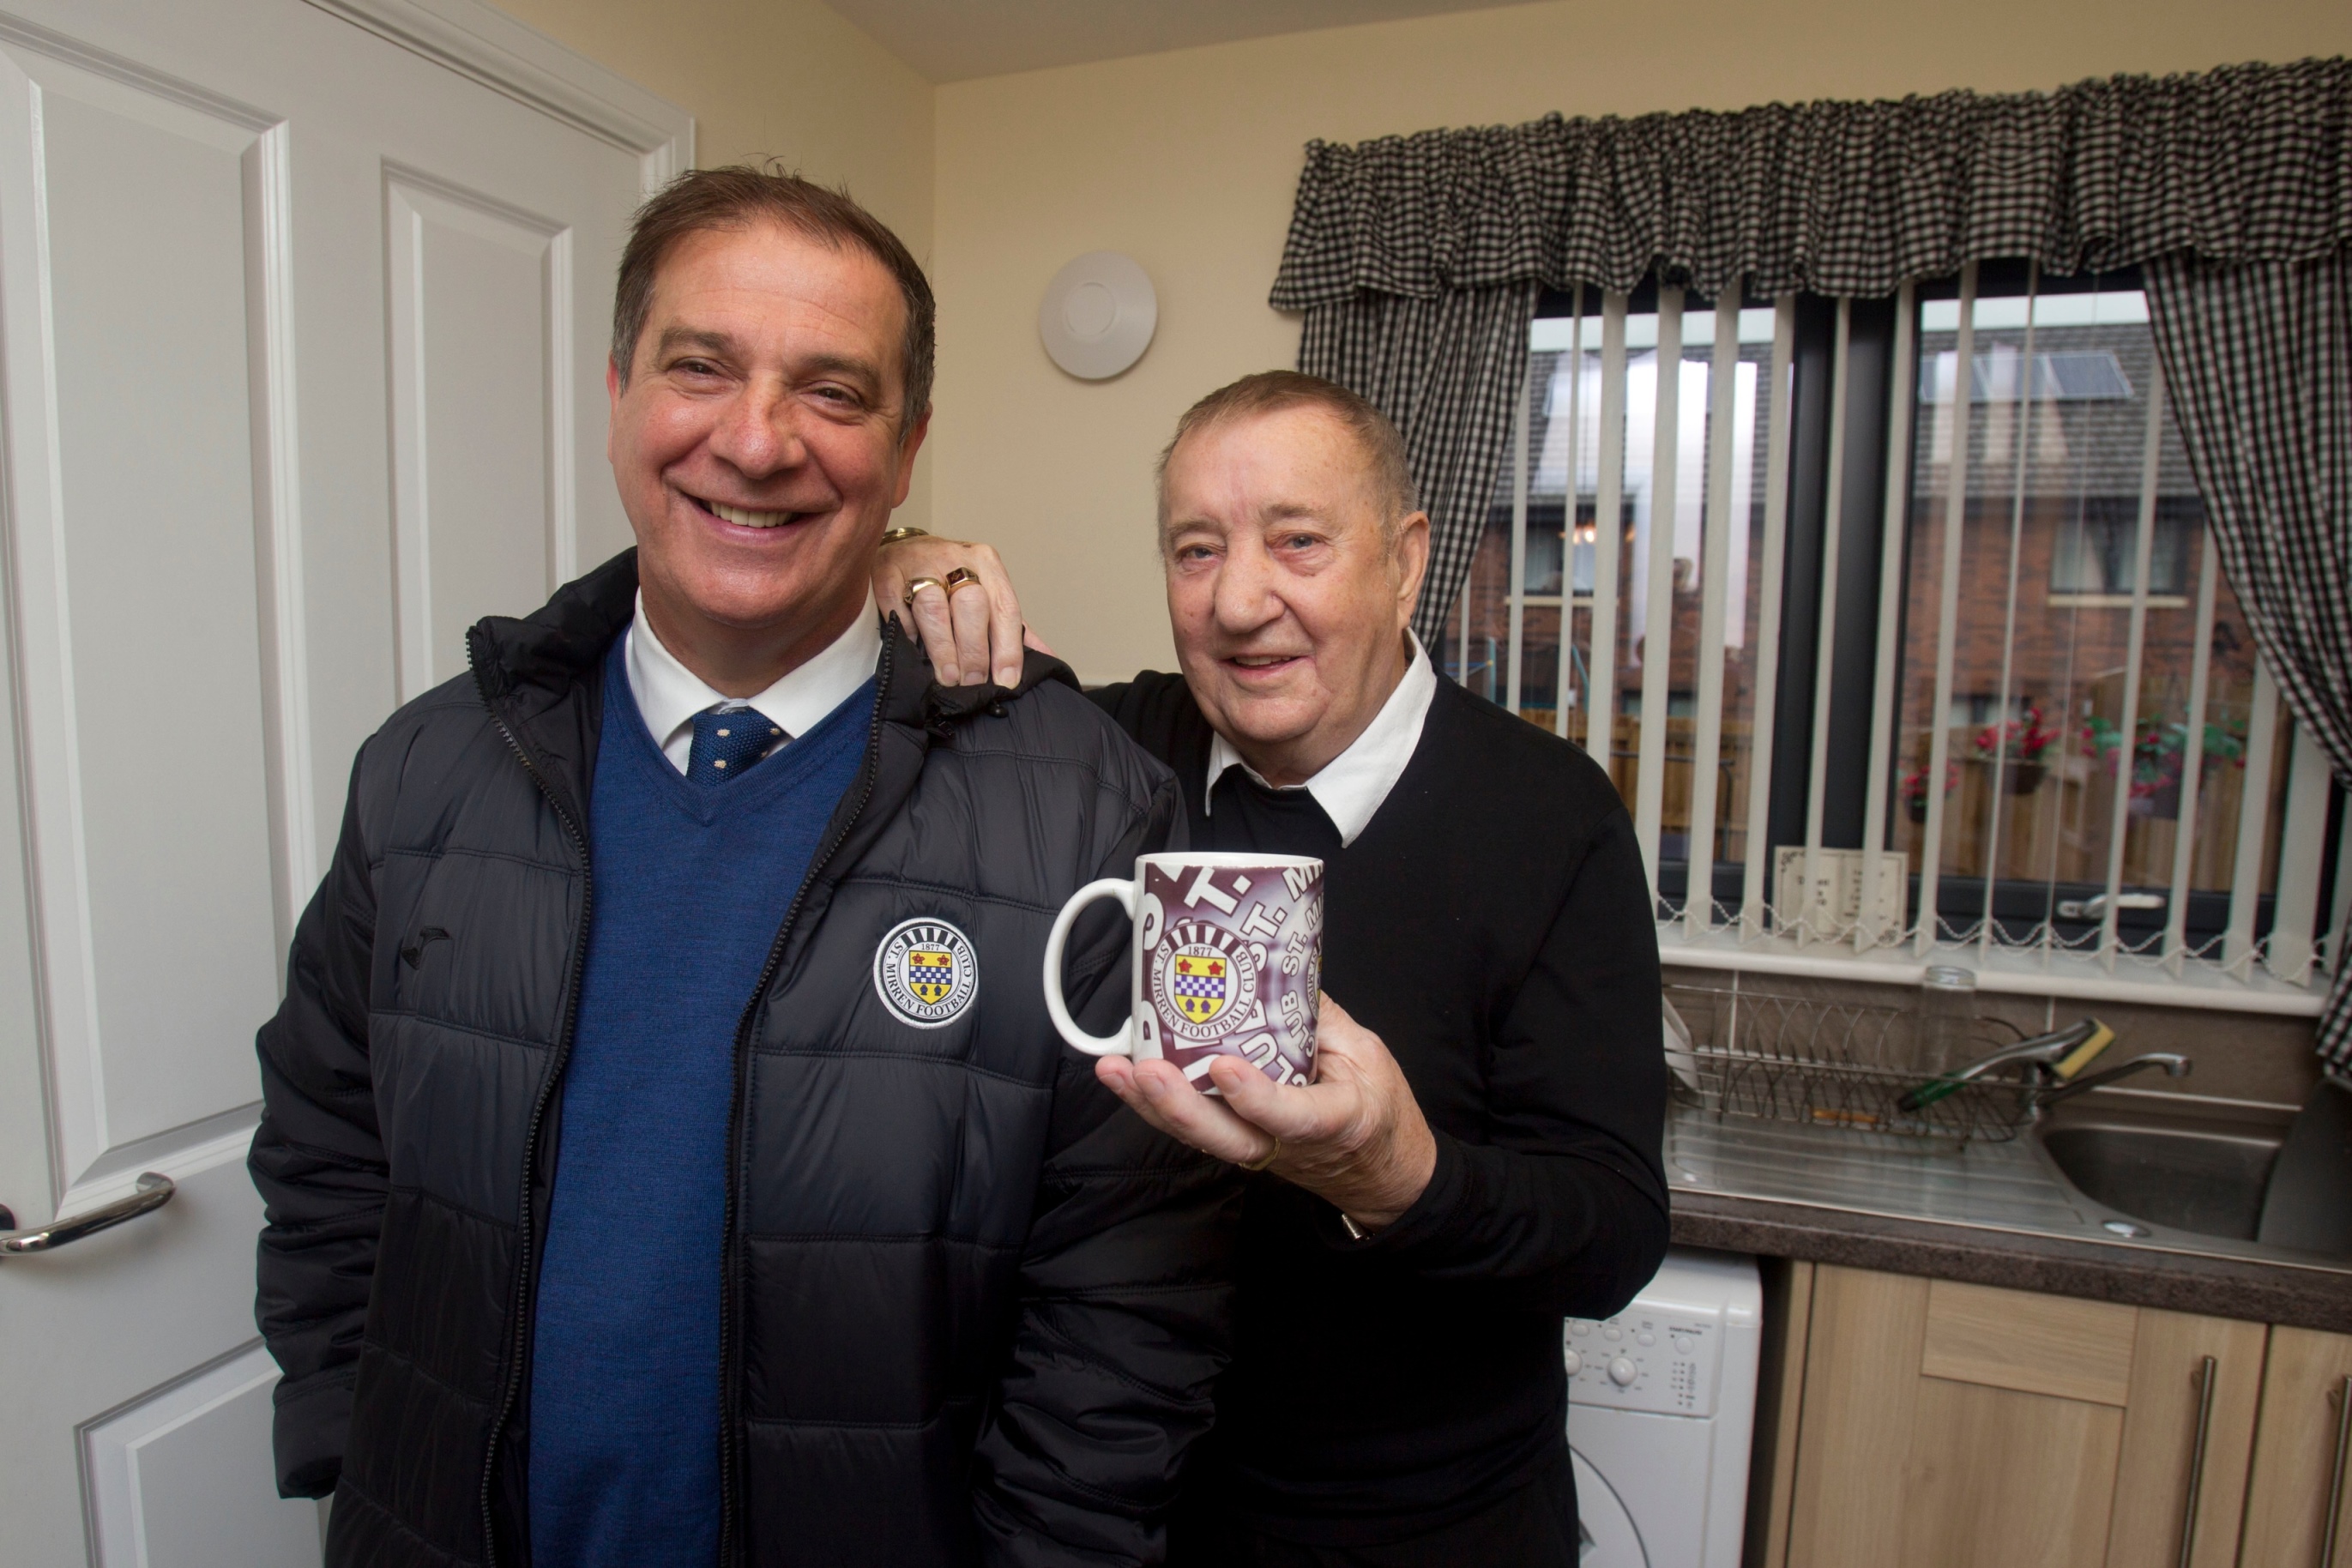 Former St Mirren ball boy moves to spiritual home as Sanctuary completes housing project